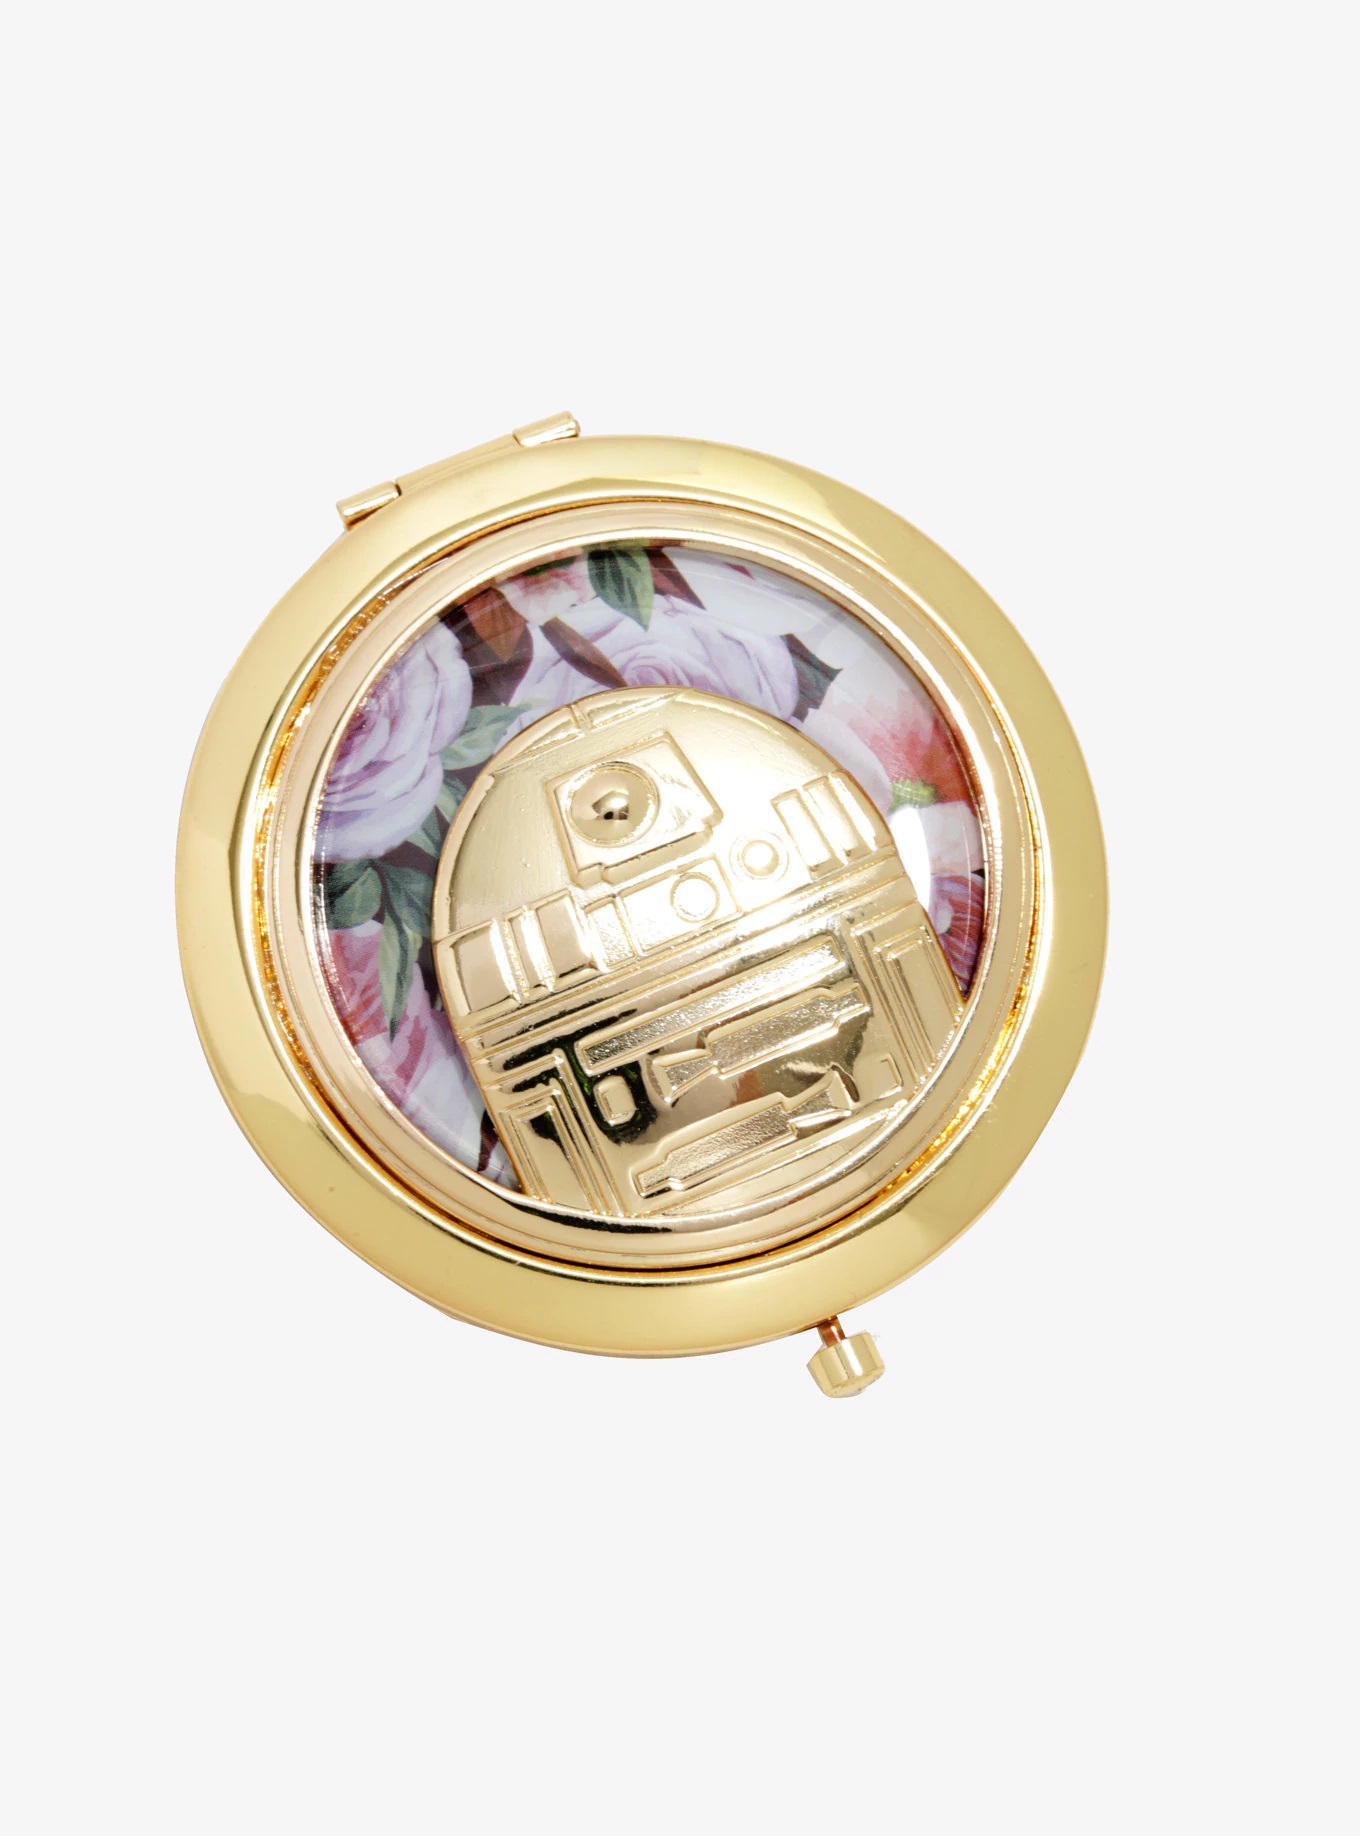 Loungefly x Star Wars R2-D2 Floral Compact Mirror at Box Lunch